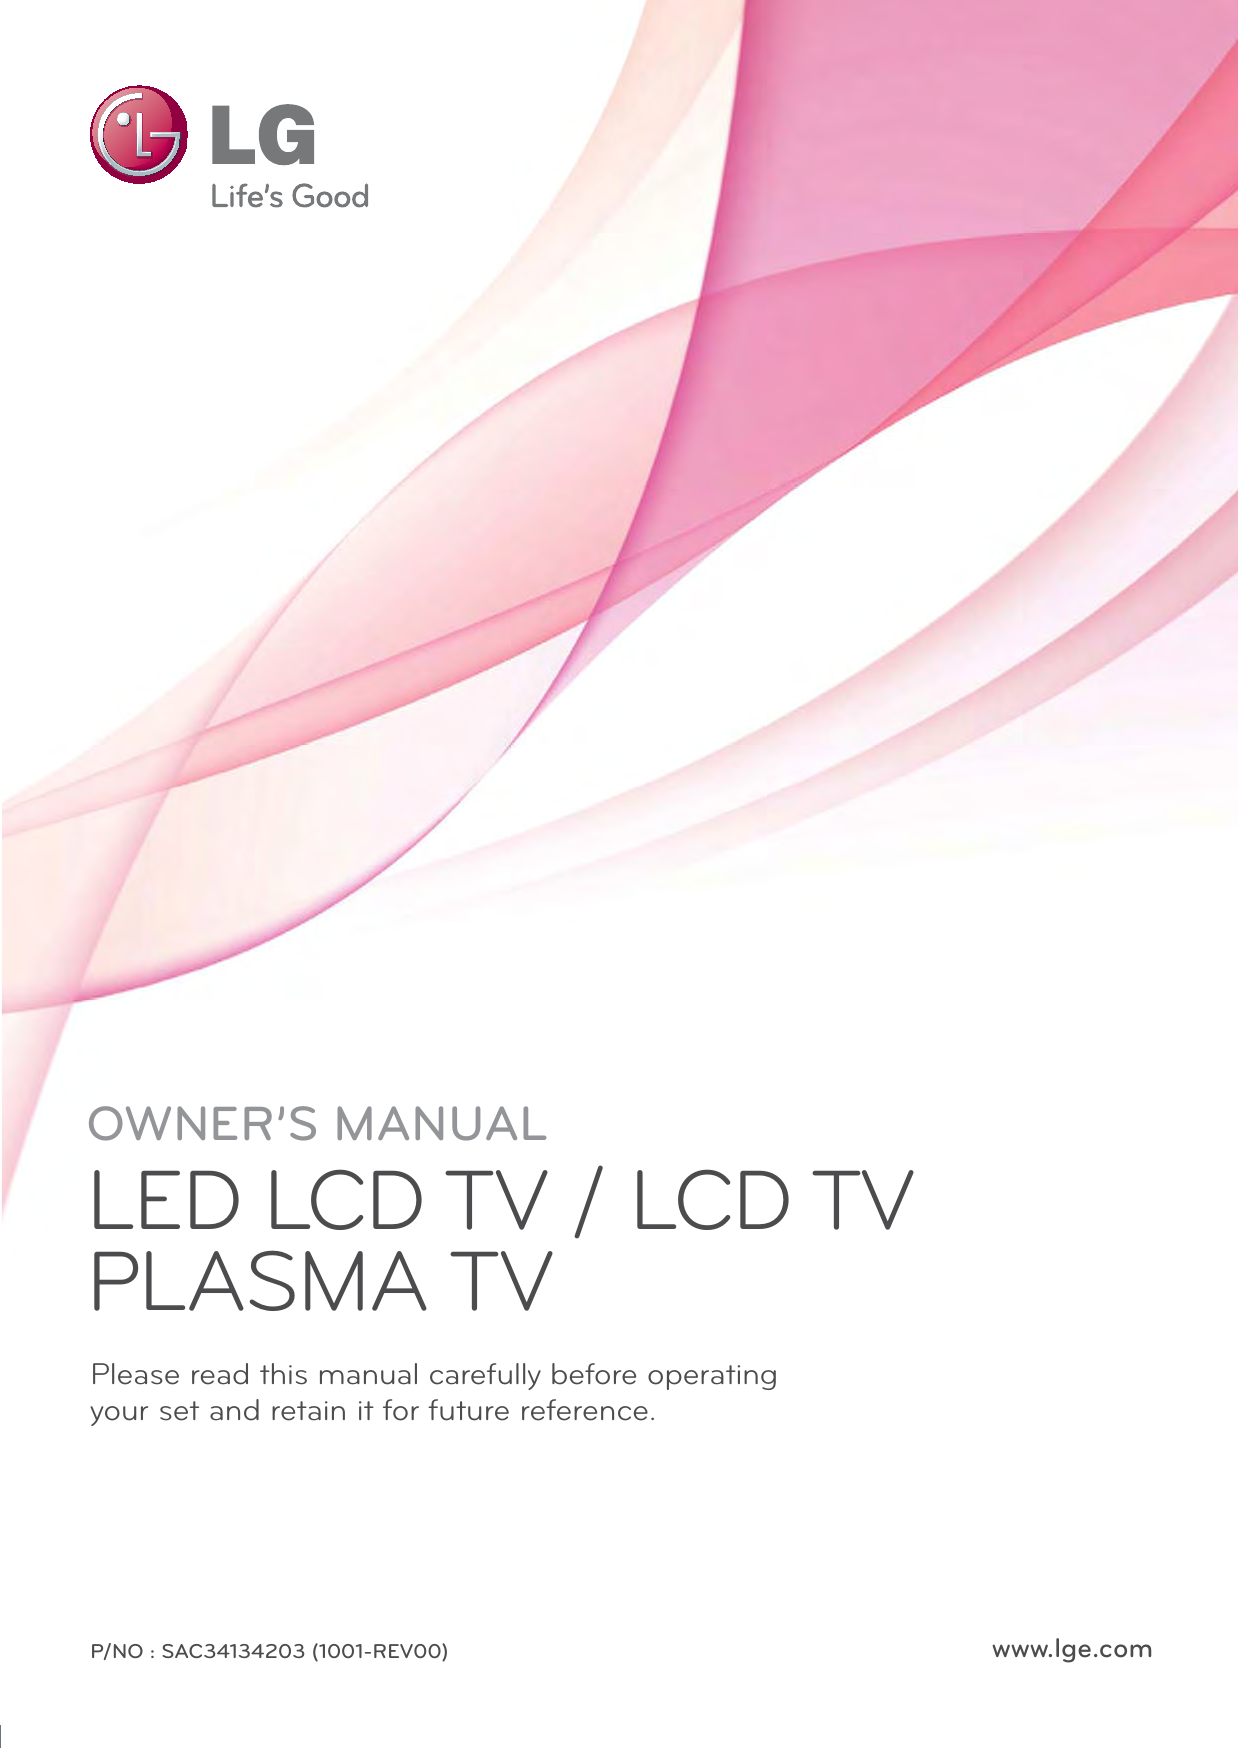 P/NO : SAC34134203 (1001-REV00) www.lge.comOWNER’S MANUALLED LCD TV / LCD TV PLASMA TV Please read this manual carefully before operatingyour set and retain it for future reference.